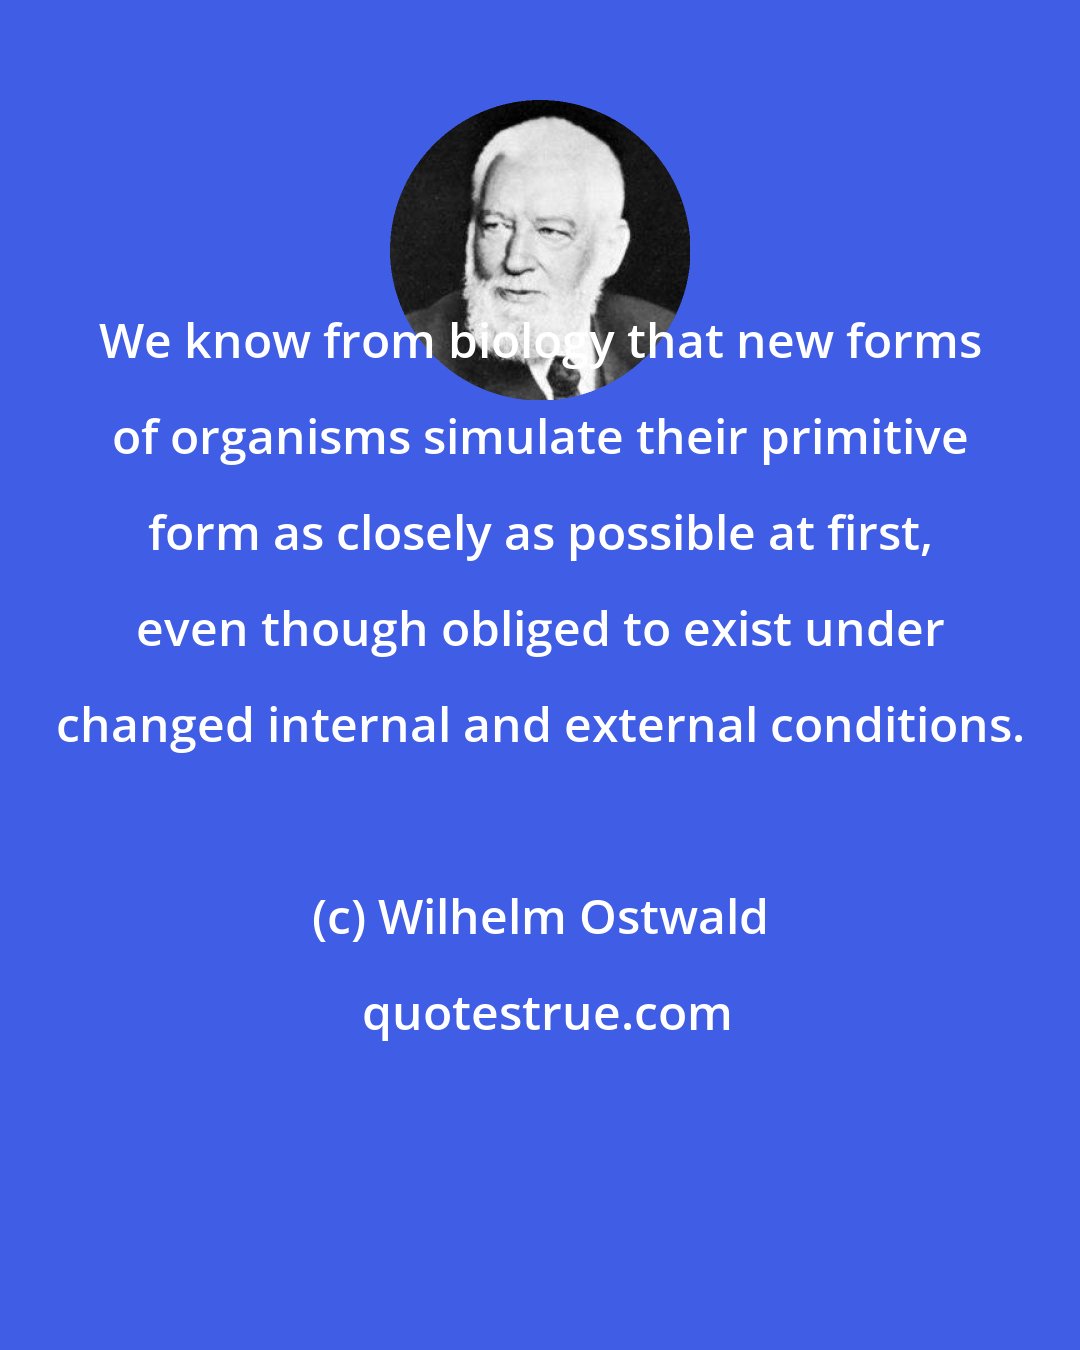 Wilhelm Ostwald: We know from biology that new forms of organisms simulate their primitive form as closely as possible at first, even though obliged to exist under changed internal and external conditions.